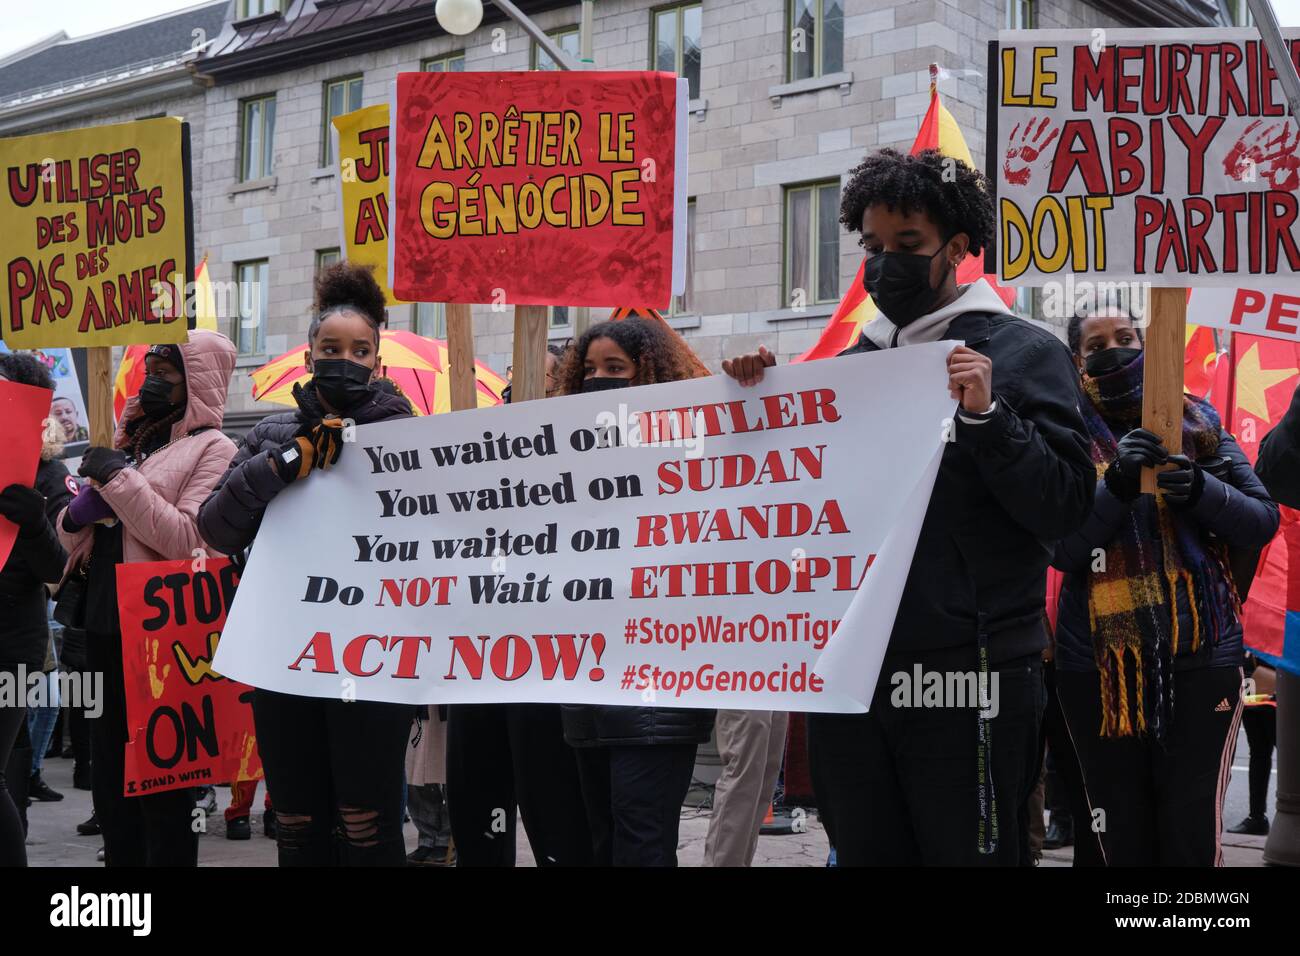 Ottawa, Canada. November 17th, 2020. Over 300 people took to the streets of Ottawa to protest the war in Tigray region of Ethiopia and the offensive undertaken by Prime Minister Abiy Ahmed against them. They stopped in front of the Embassy of the United States of America to demand intervention in the conflict. Abiy, last year's Nobel Peace Prize winner, continues to reject international pleas for dialogue and de-escalation in the two-week conflict. Credit: meanderingemu/Alamy Live News Stock Photo